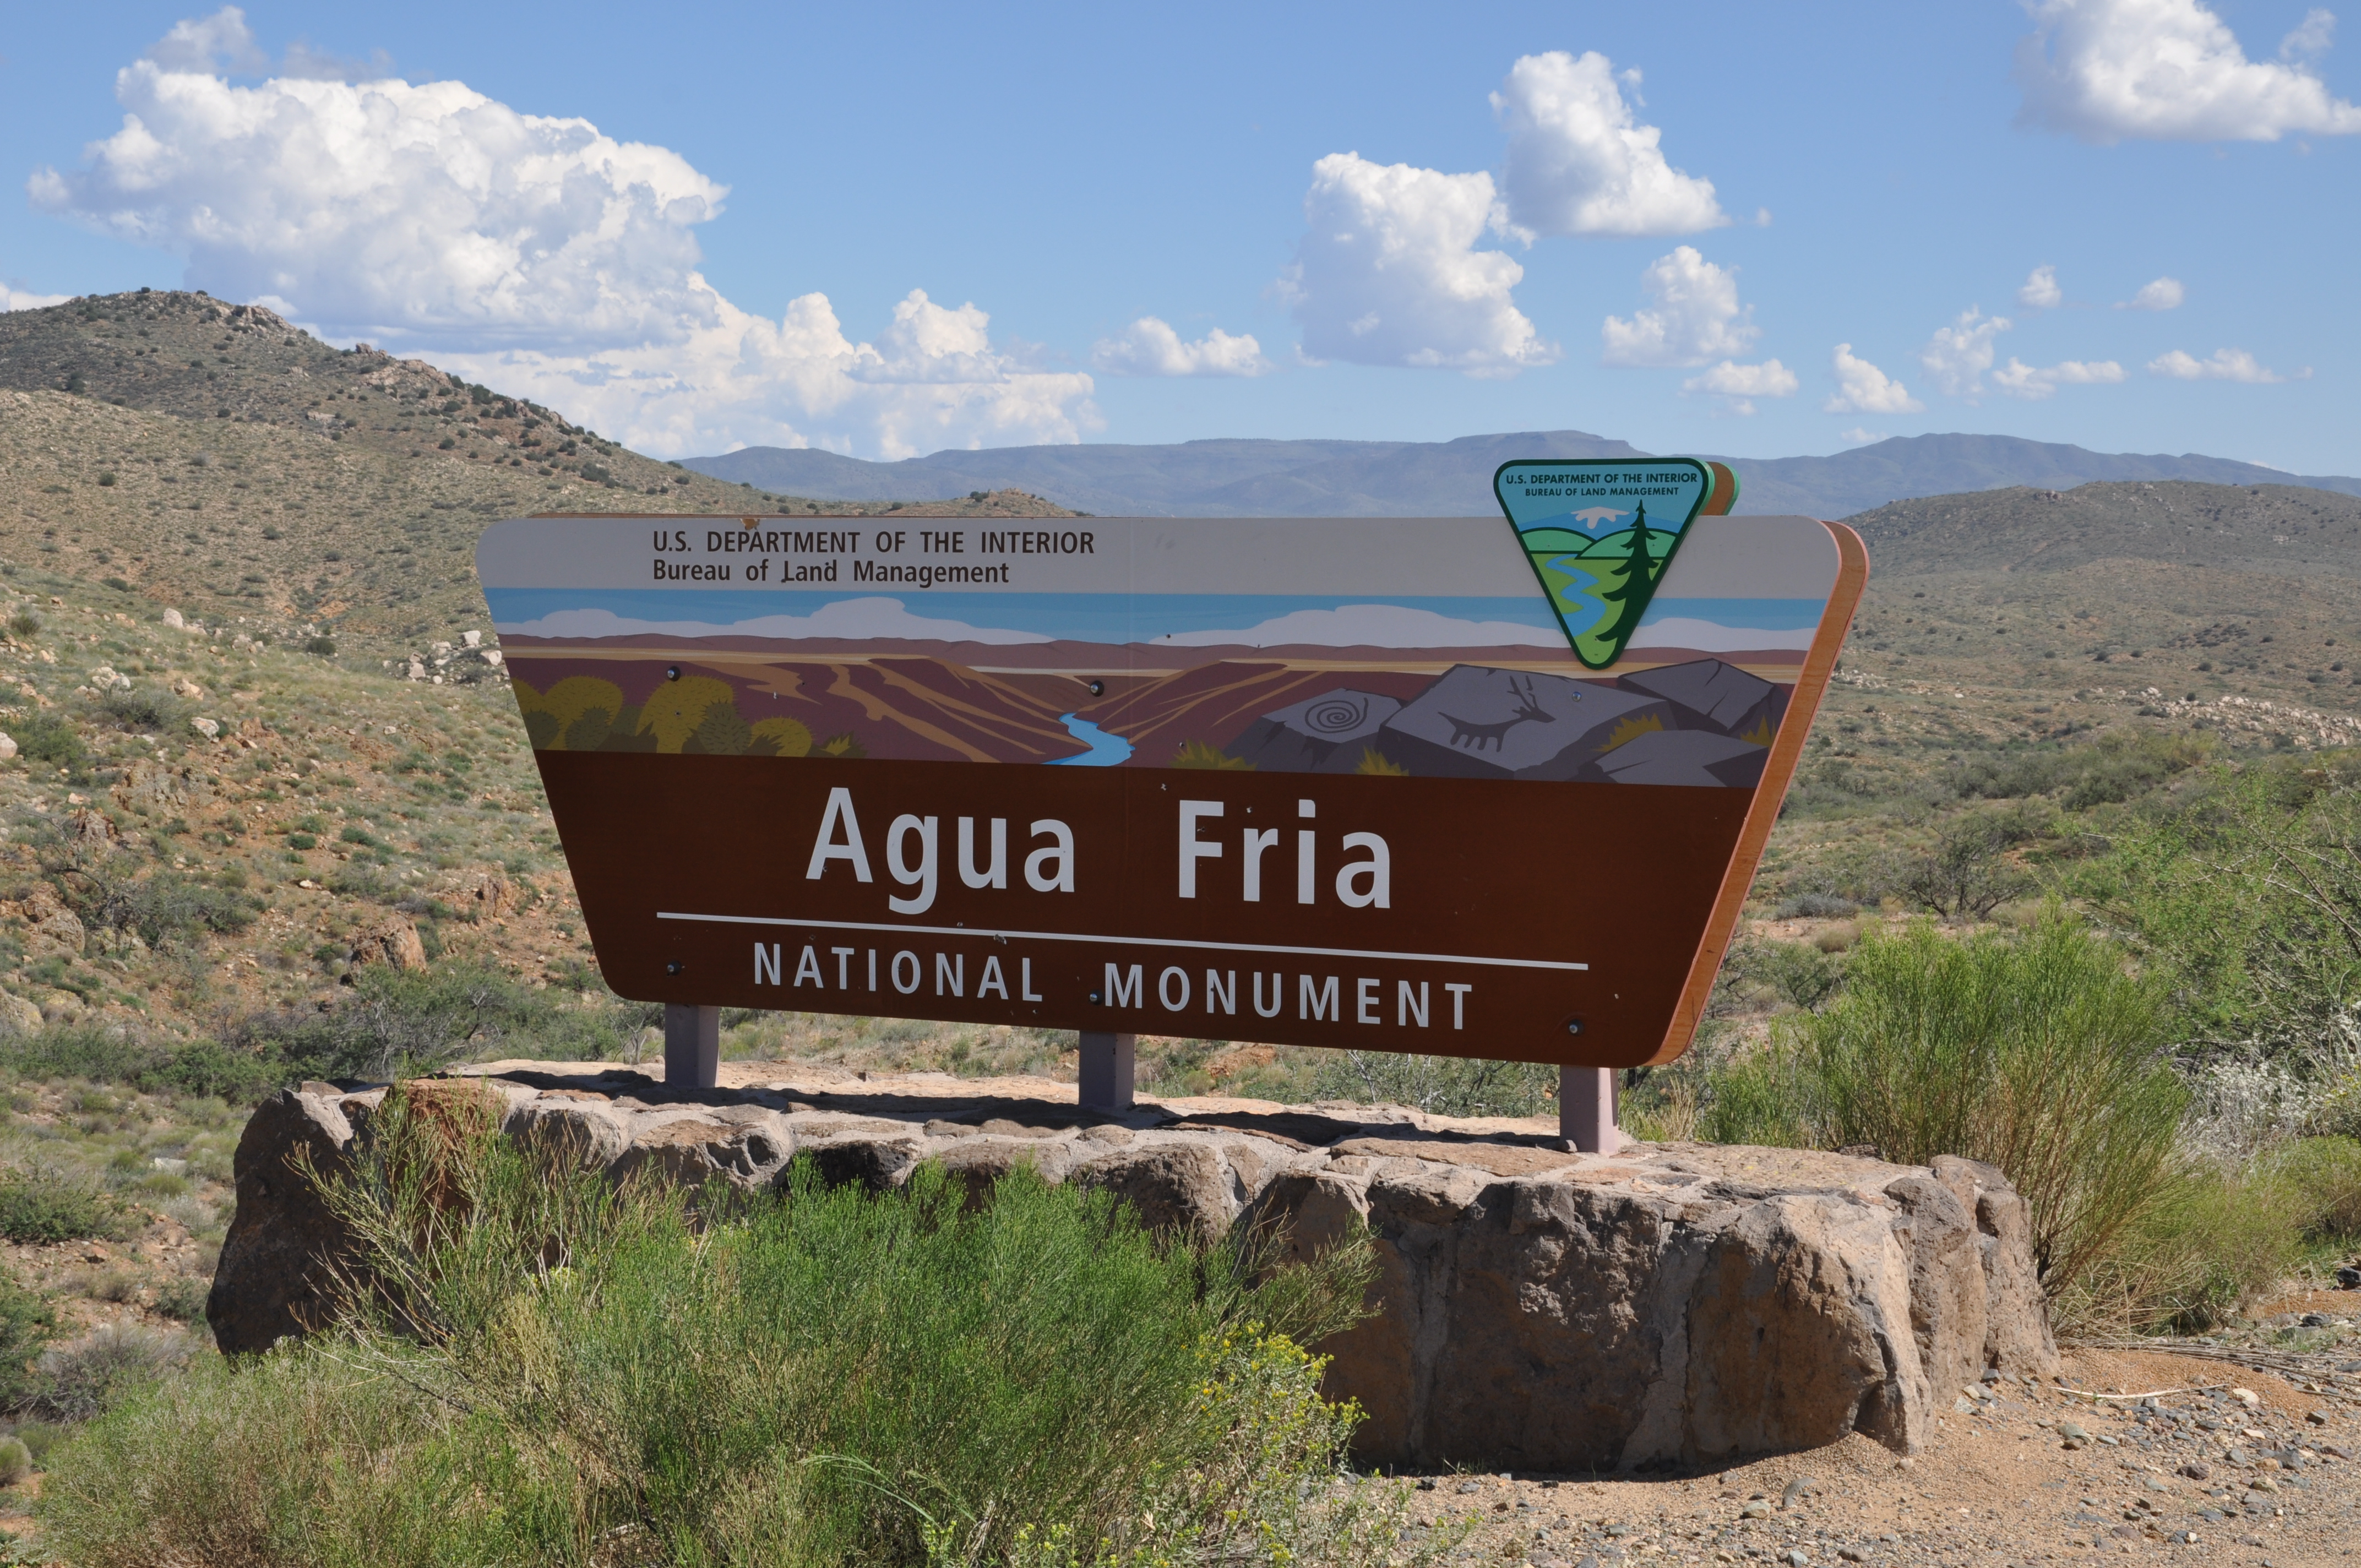 WWP wins a stay of grazing decision on Agua Fria National Monument